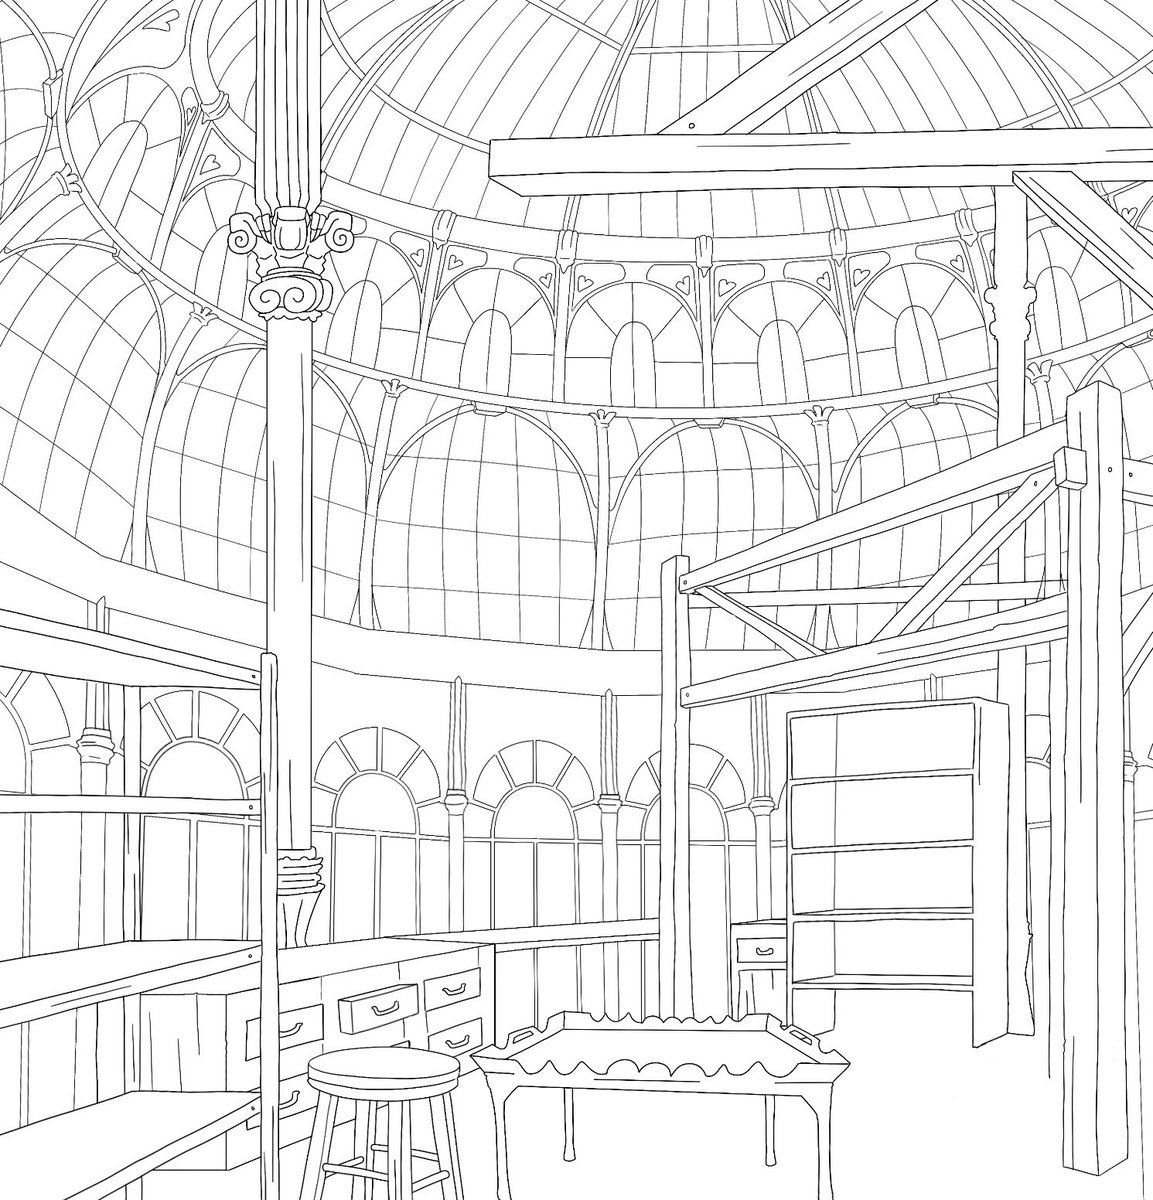 I'm suffering so much from impulsively creating entire backgrounds 